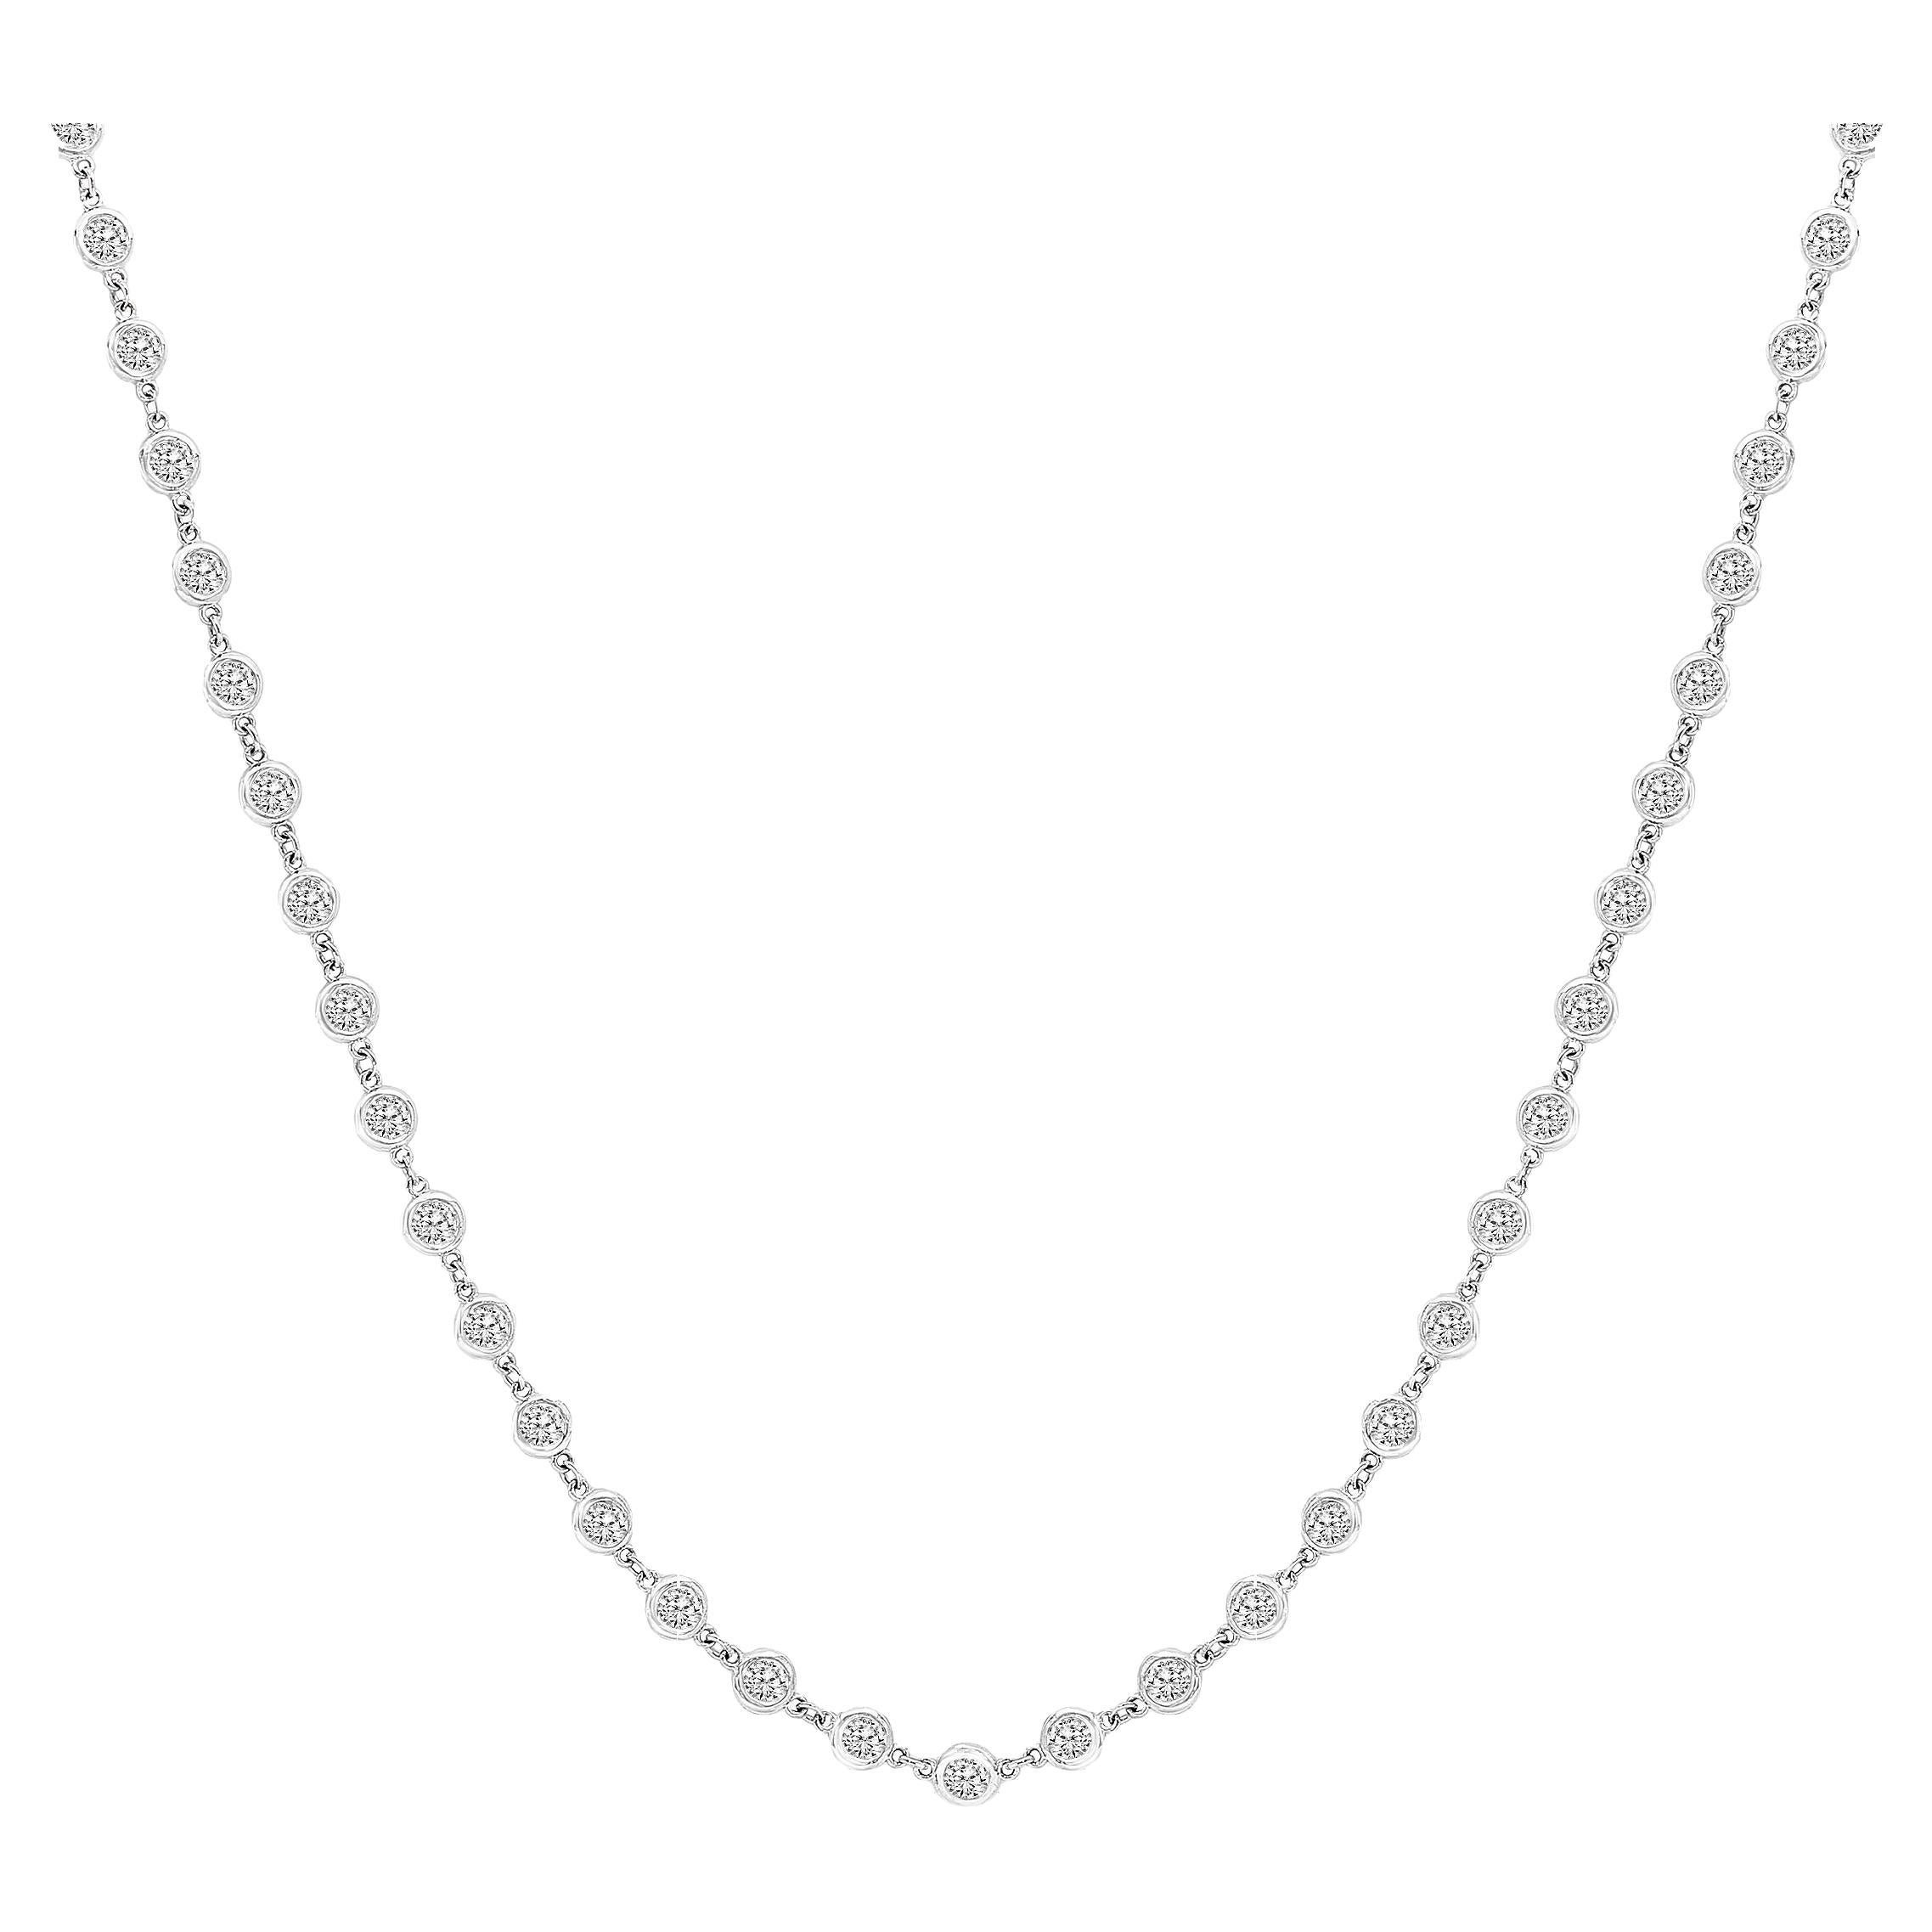 5.03 Carat Diamonds by the Yard Necklace in 14K White Gold